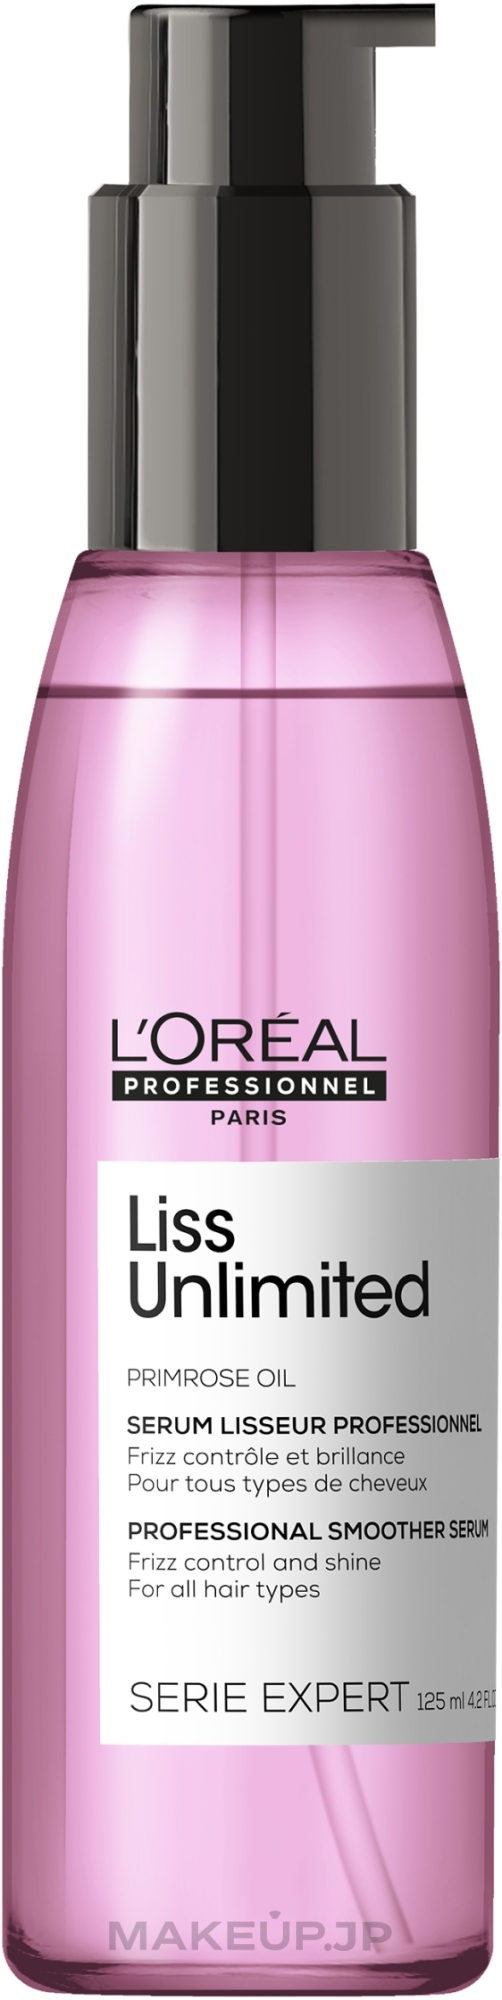 Smoothing Heat Protective for Unruly Hair - L'Oreal Professionnel Liss Unlimited Blow-Dry Oil — photo 125 ml NEW